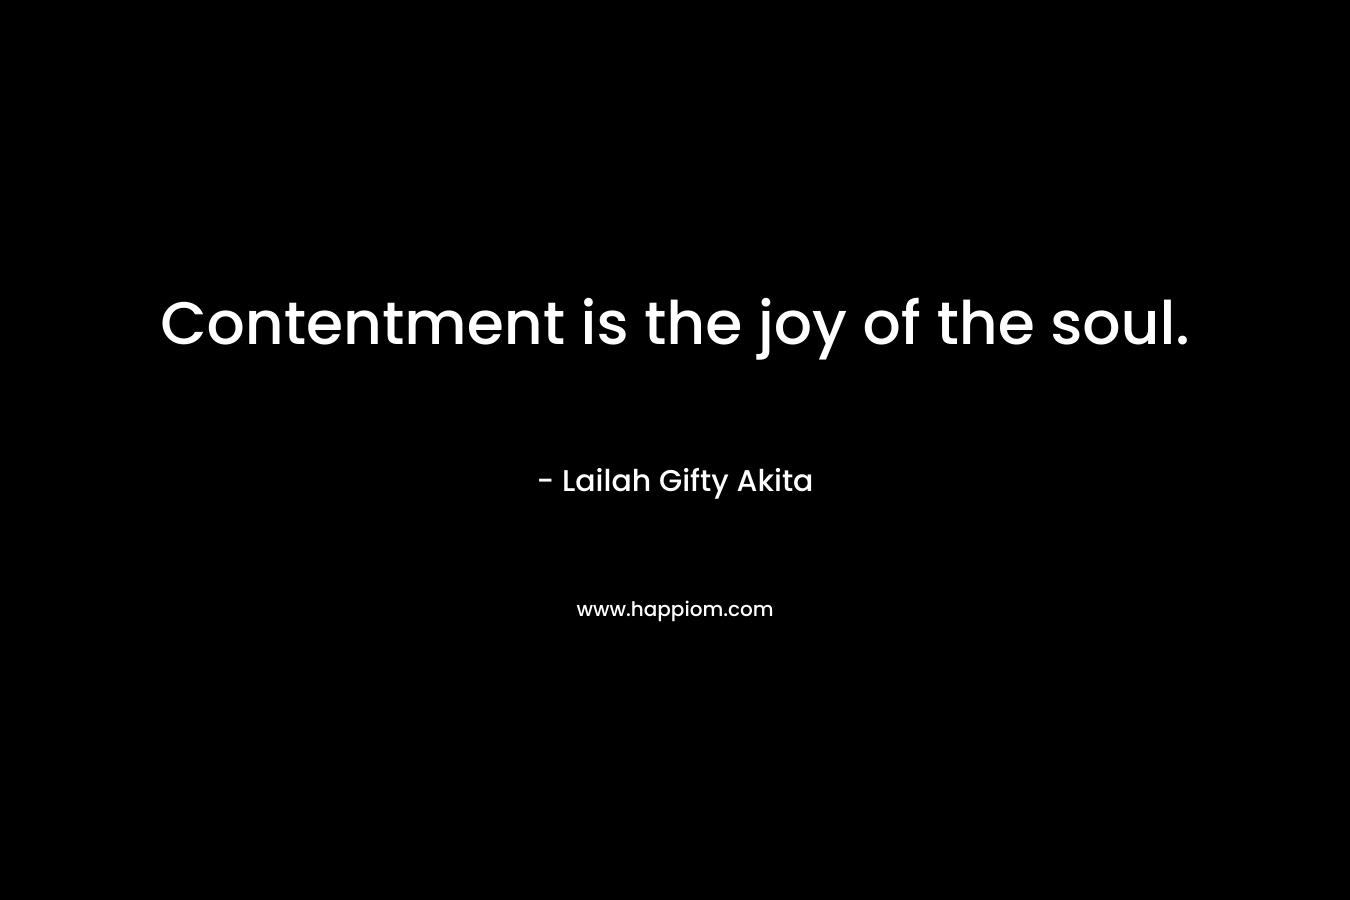 Contentment is the joy of the soul.